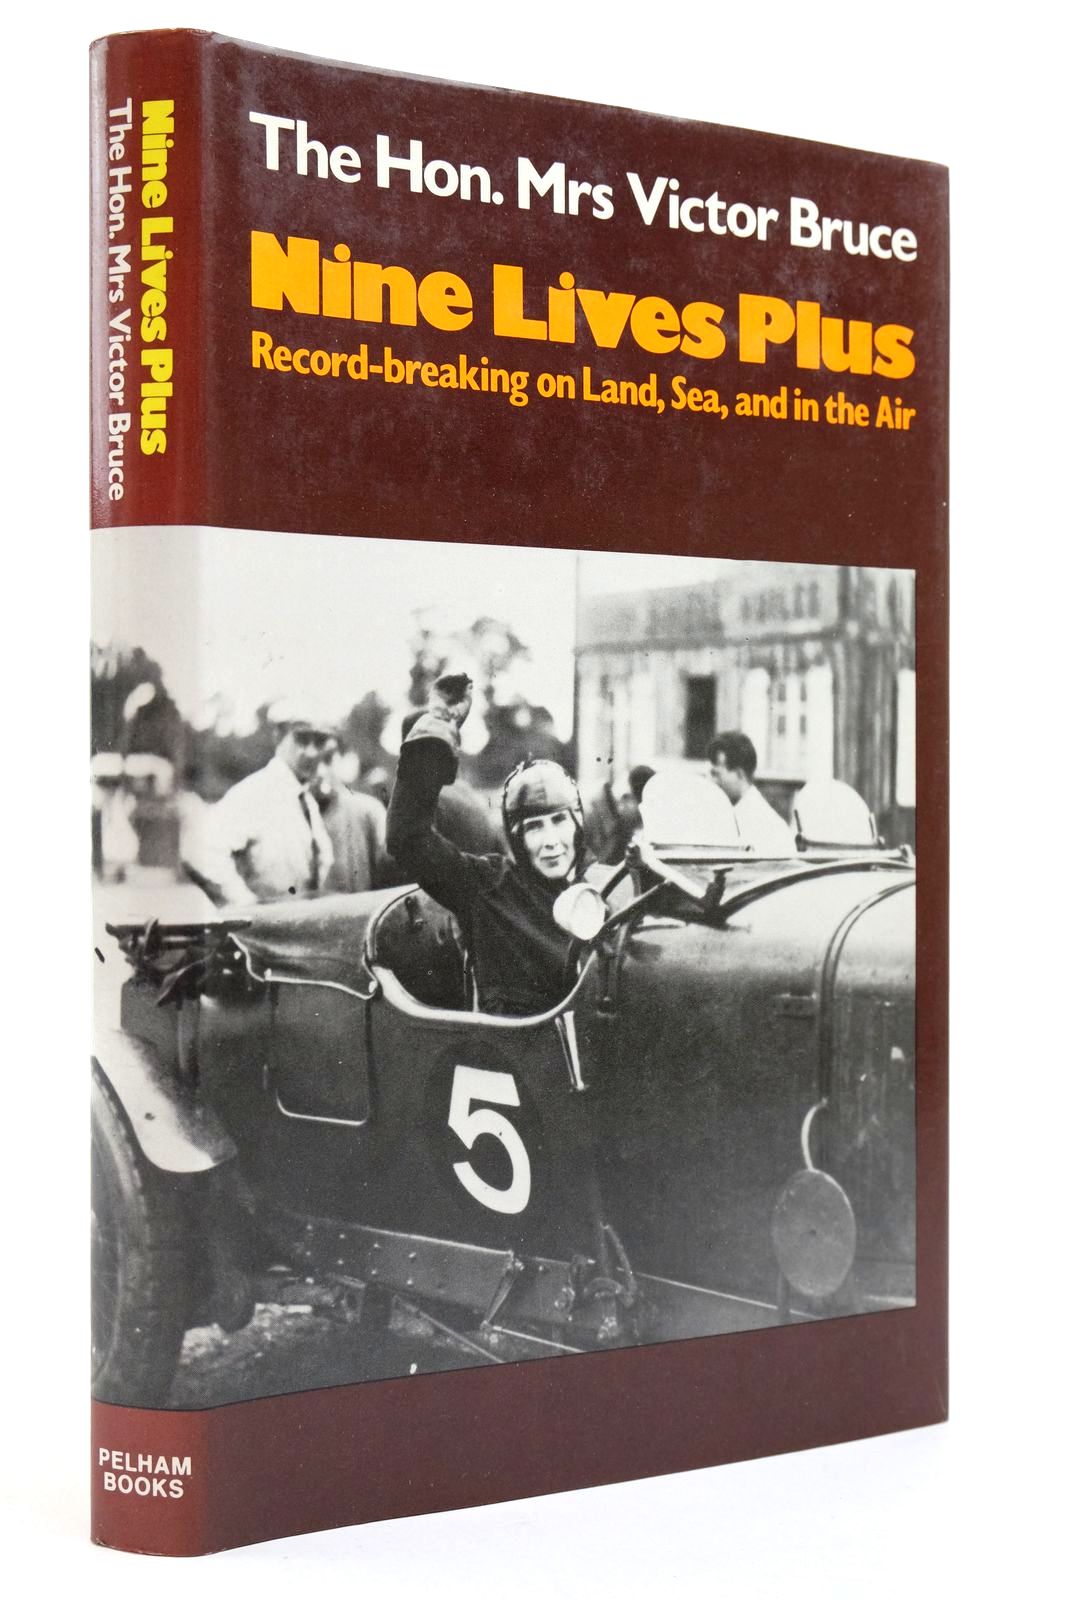 Photo of NINE LIVES PLUS written by Bruce, The Hon. Mrs Victor published by Pelham Books (STOCK CODE: 2140118)  for sale by Stella & Rose's Books